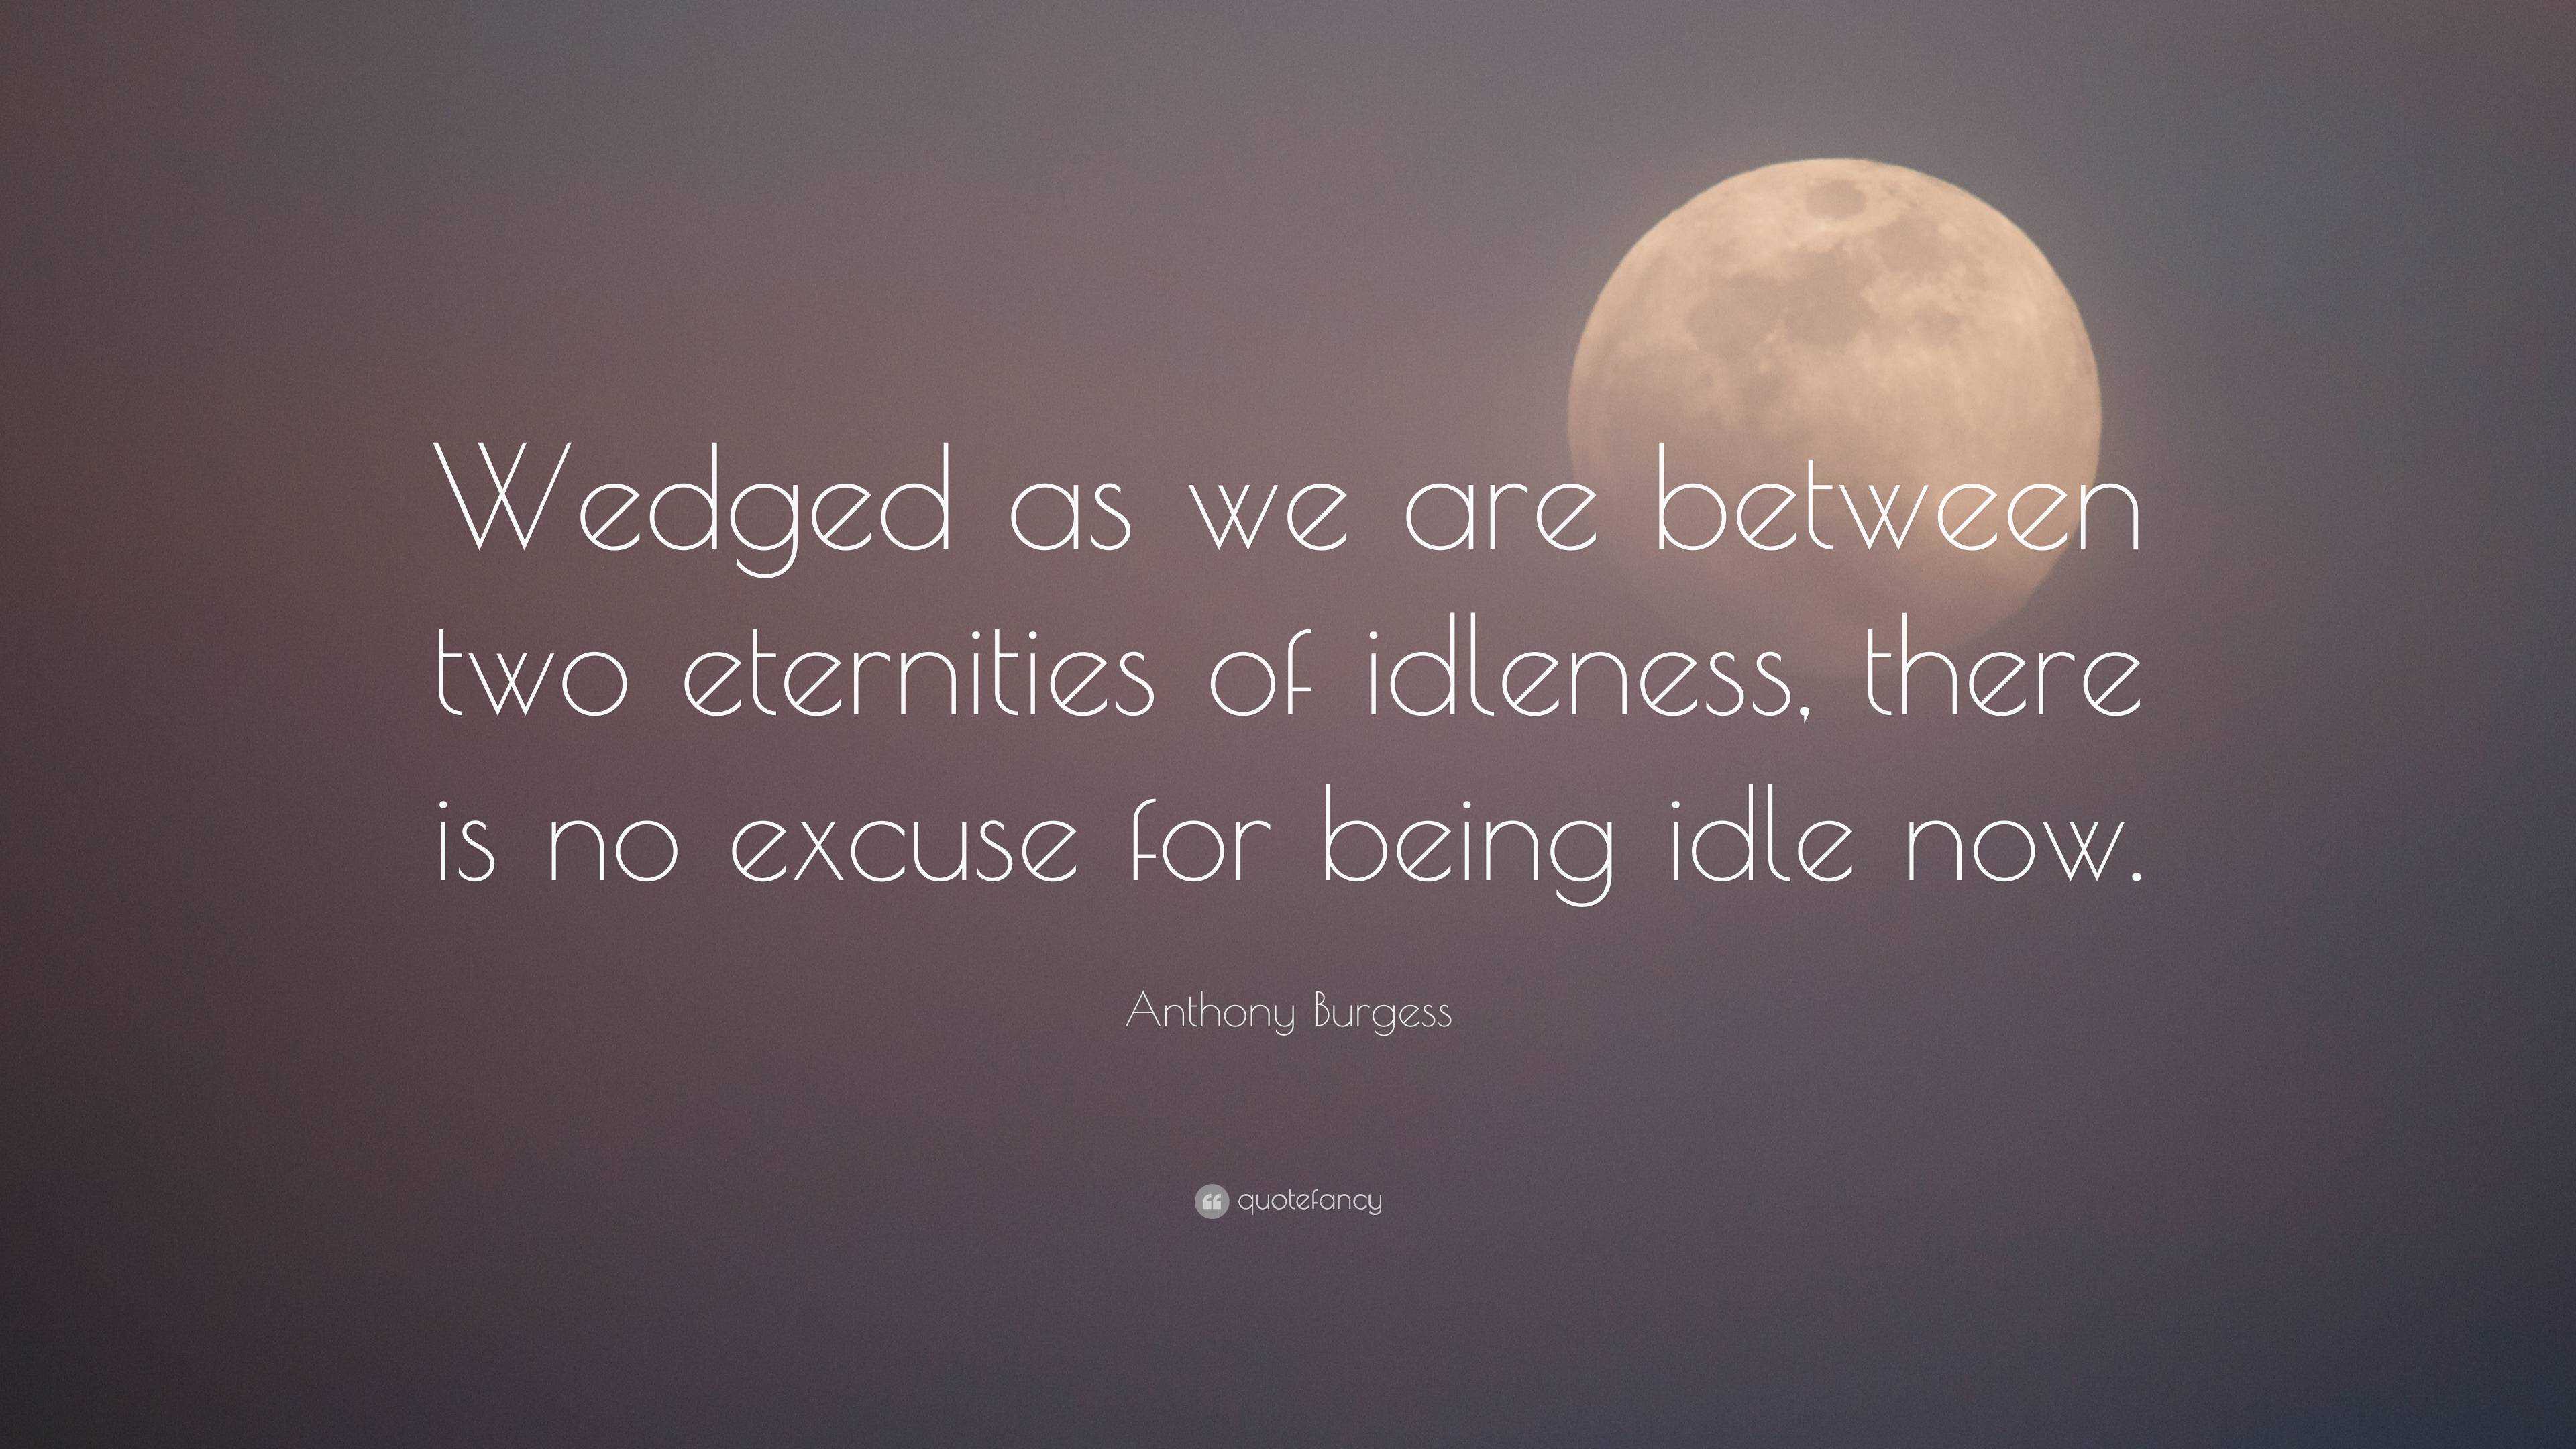 Anthony Burgess Quote: “Wedged as we are between two eternities of ...